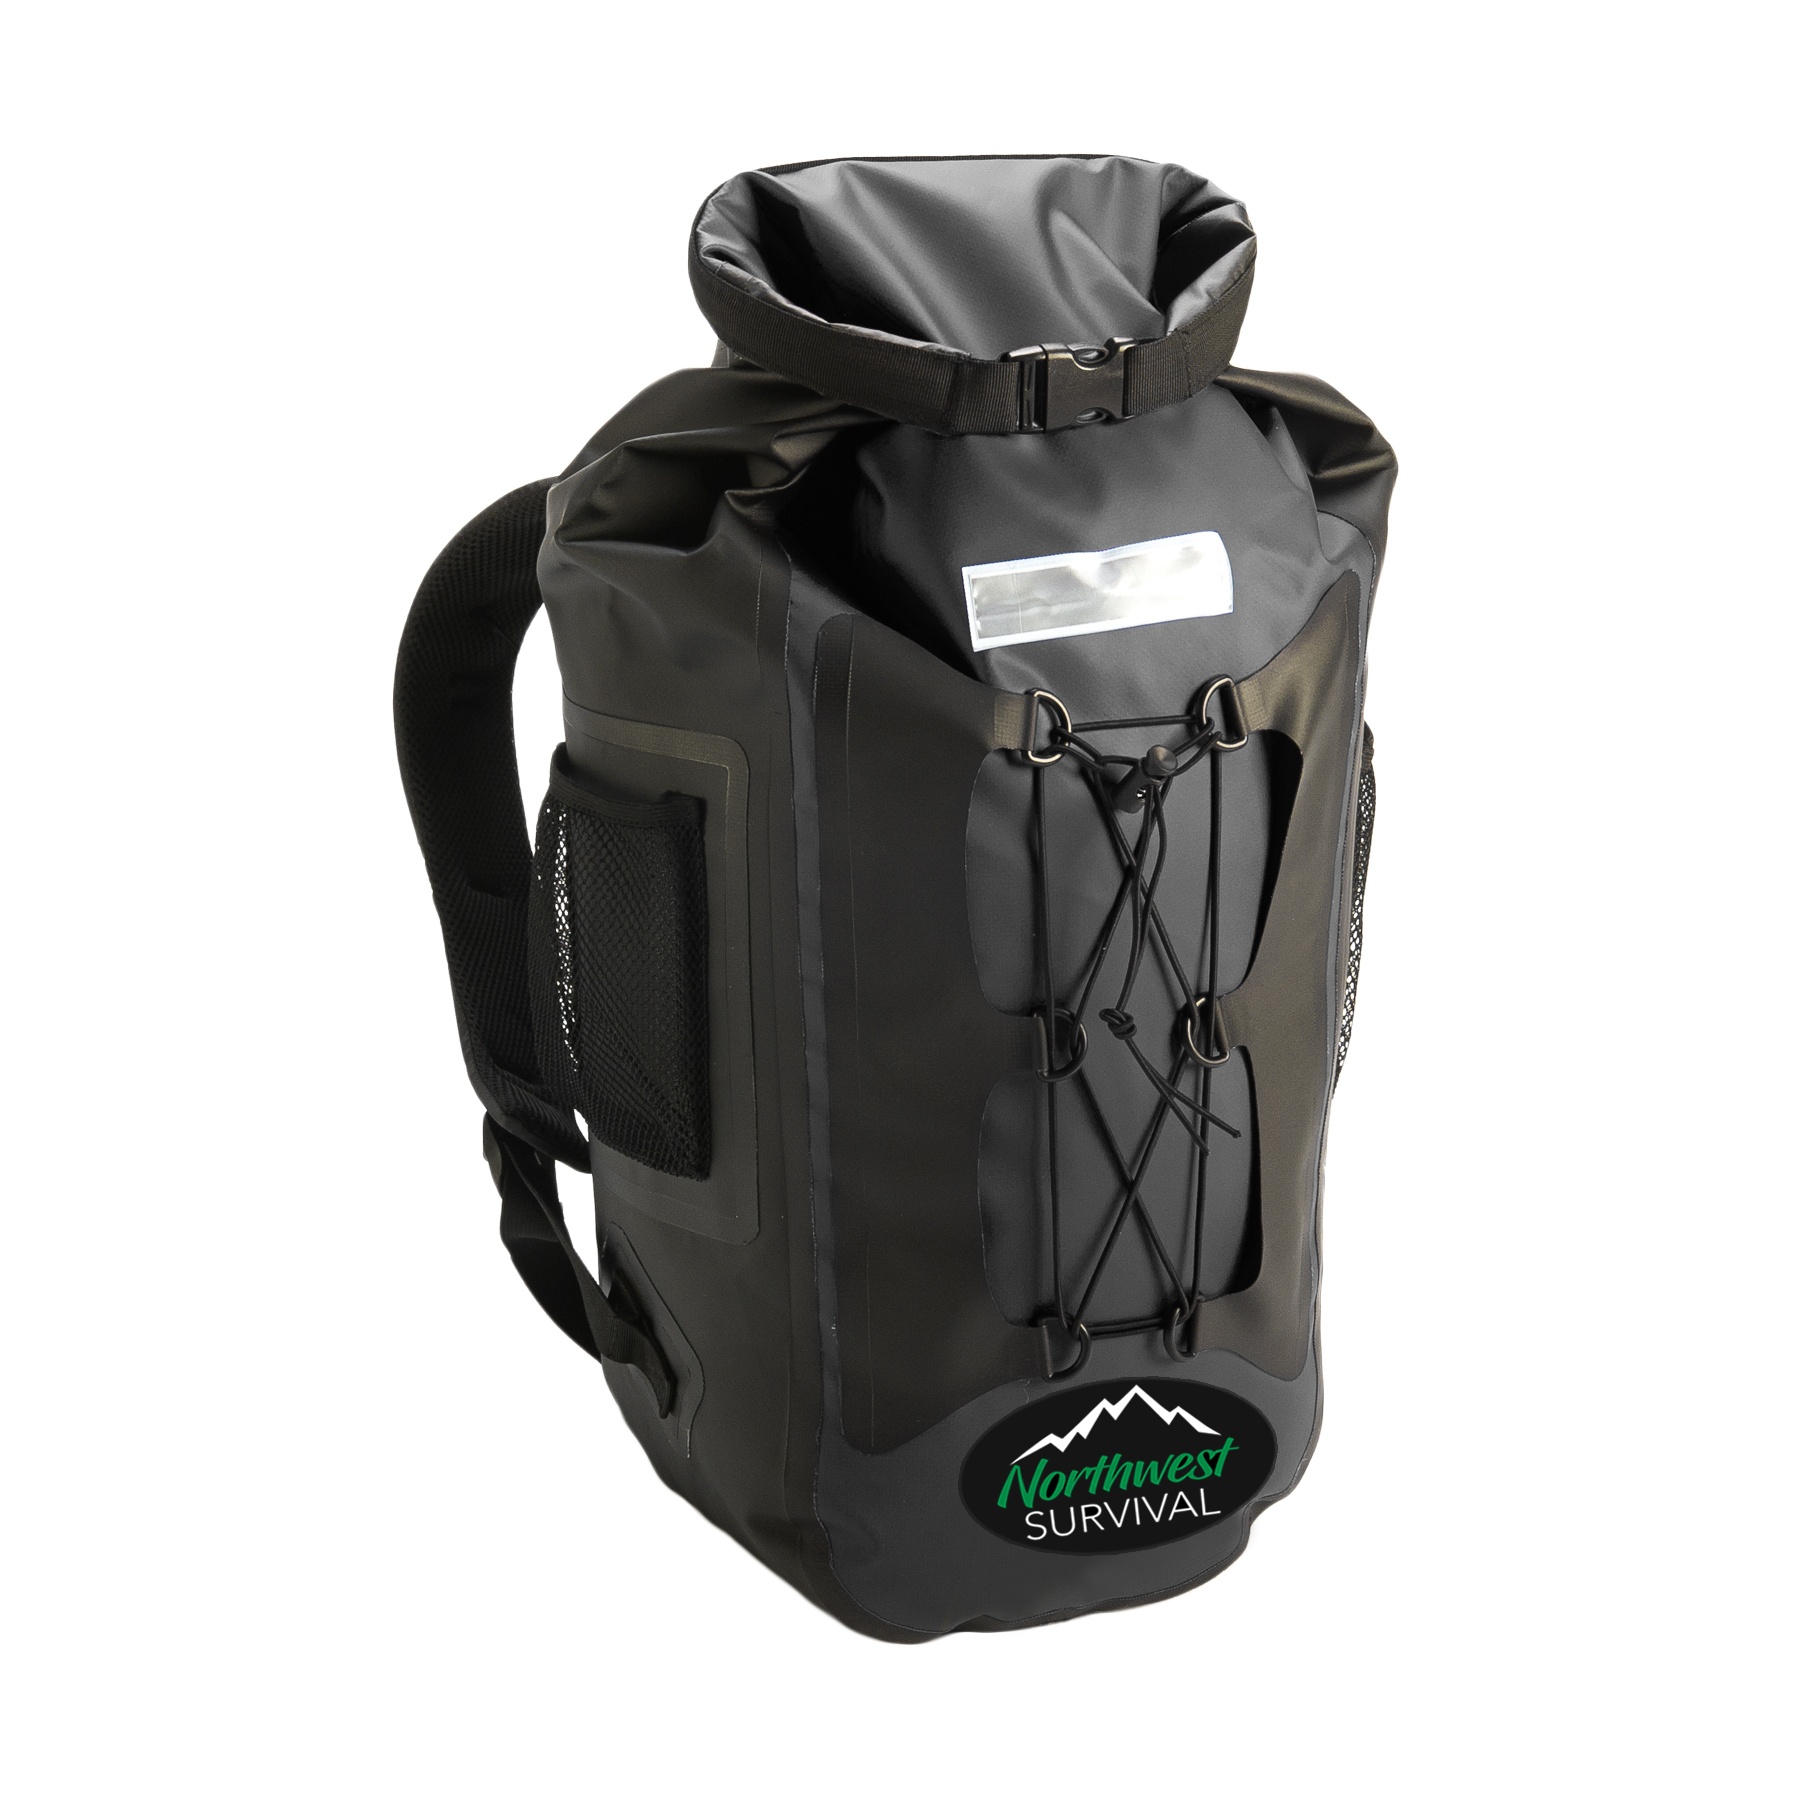 1.5 Liter Rover Dry Bag – DRYCASE